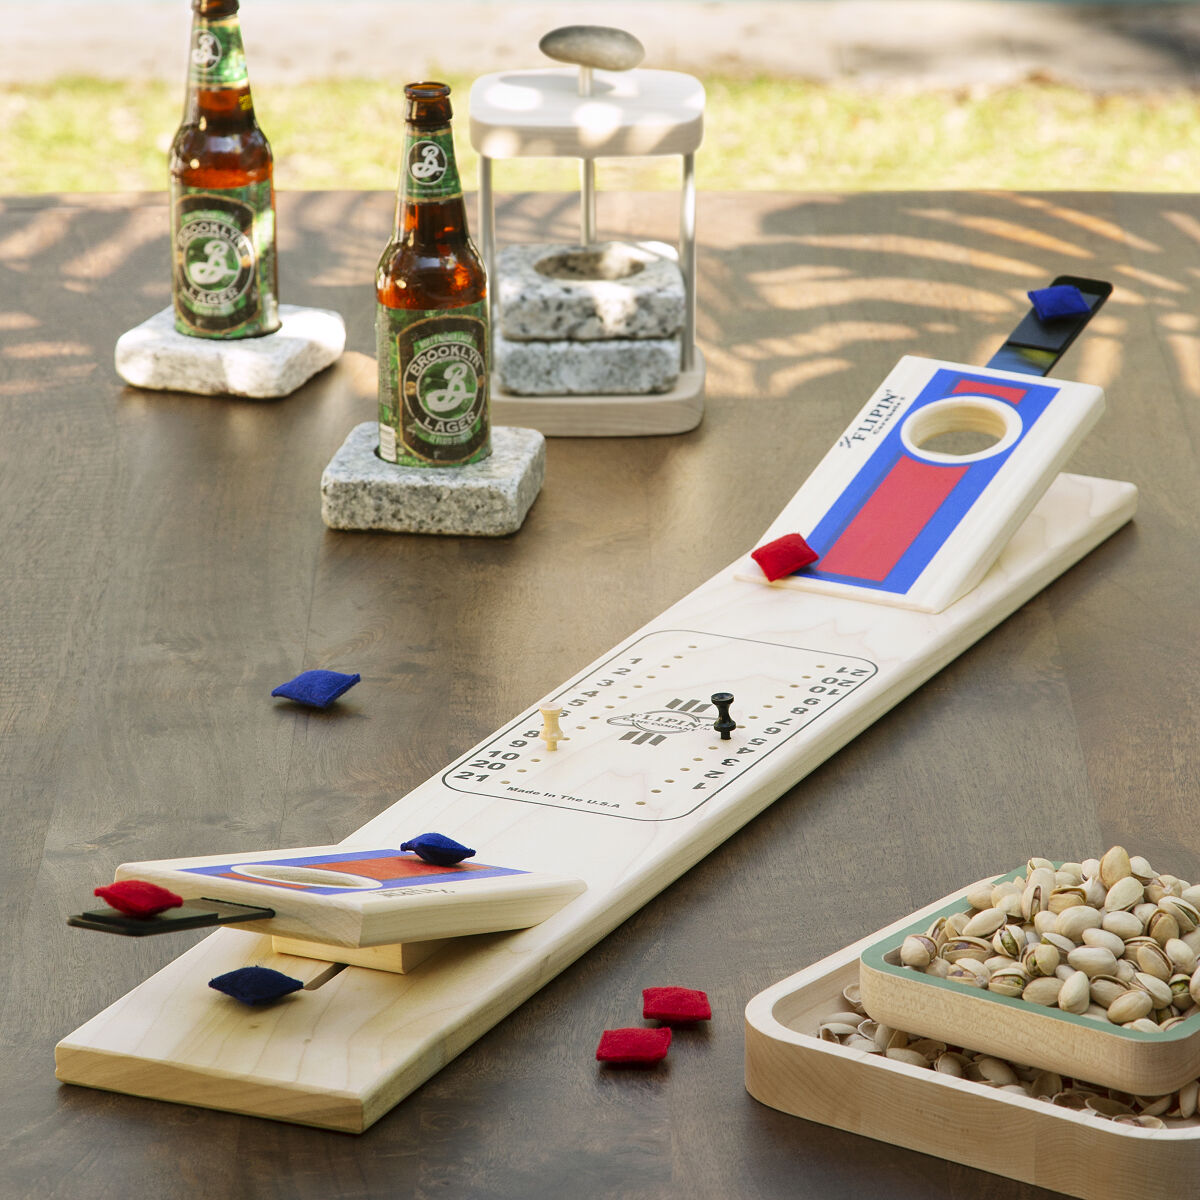 Tabletop Cornhole | wooden tabletop game | UncommonGoods